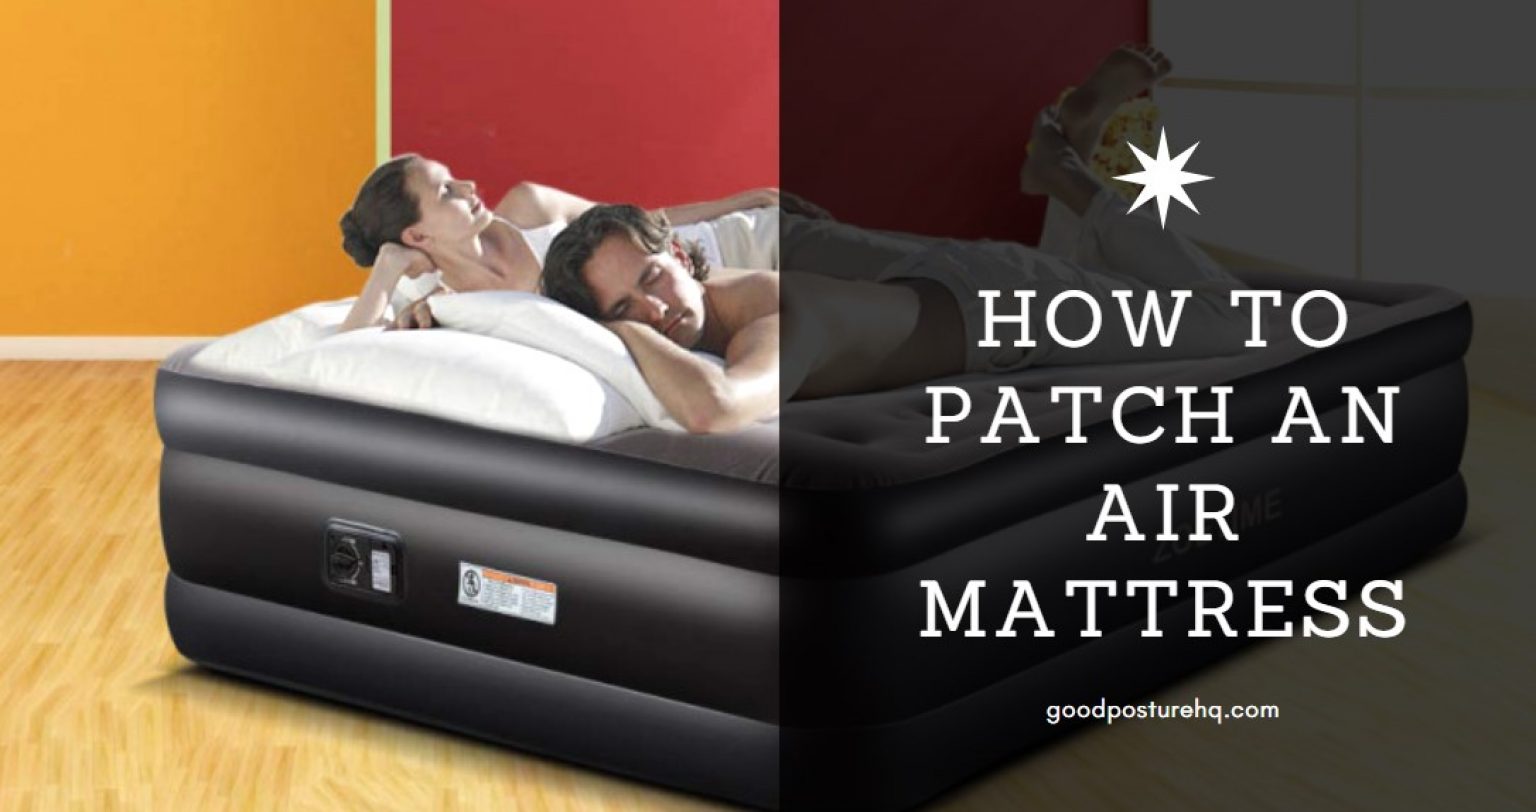 air mattress patches leaks